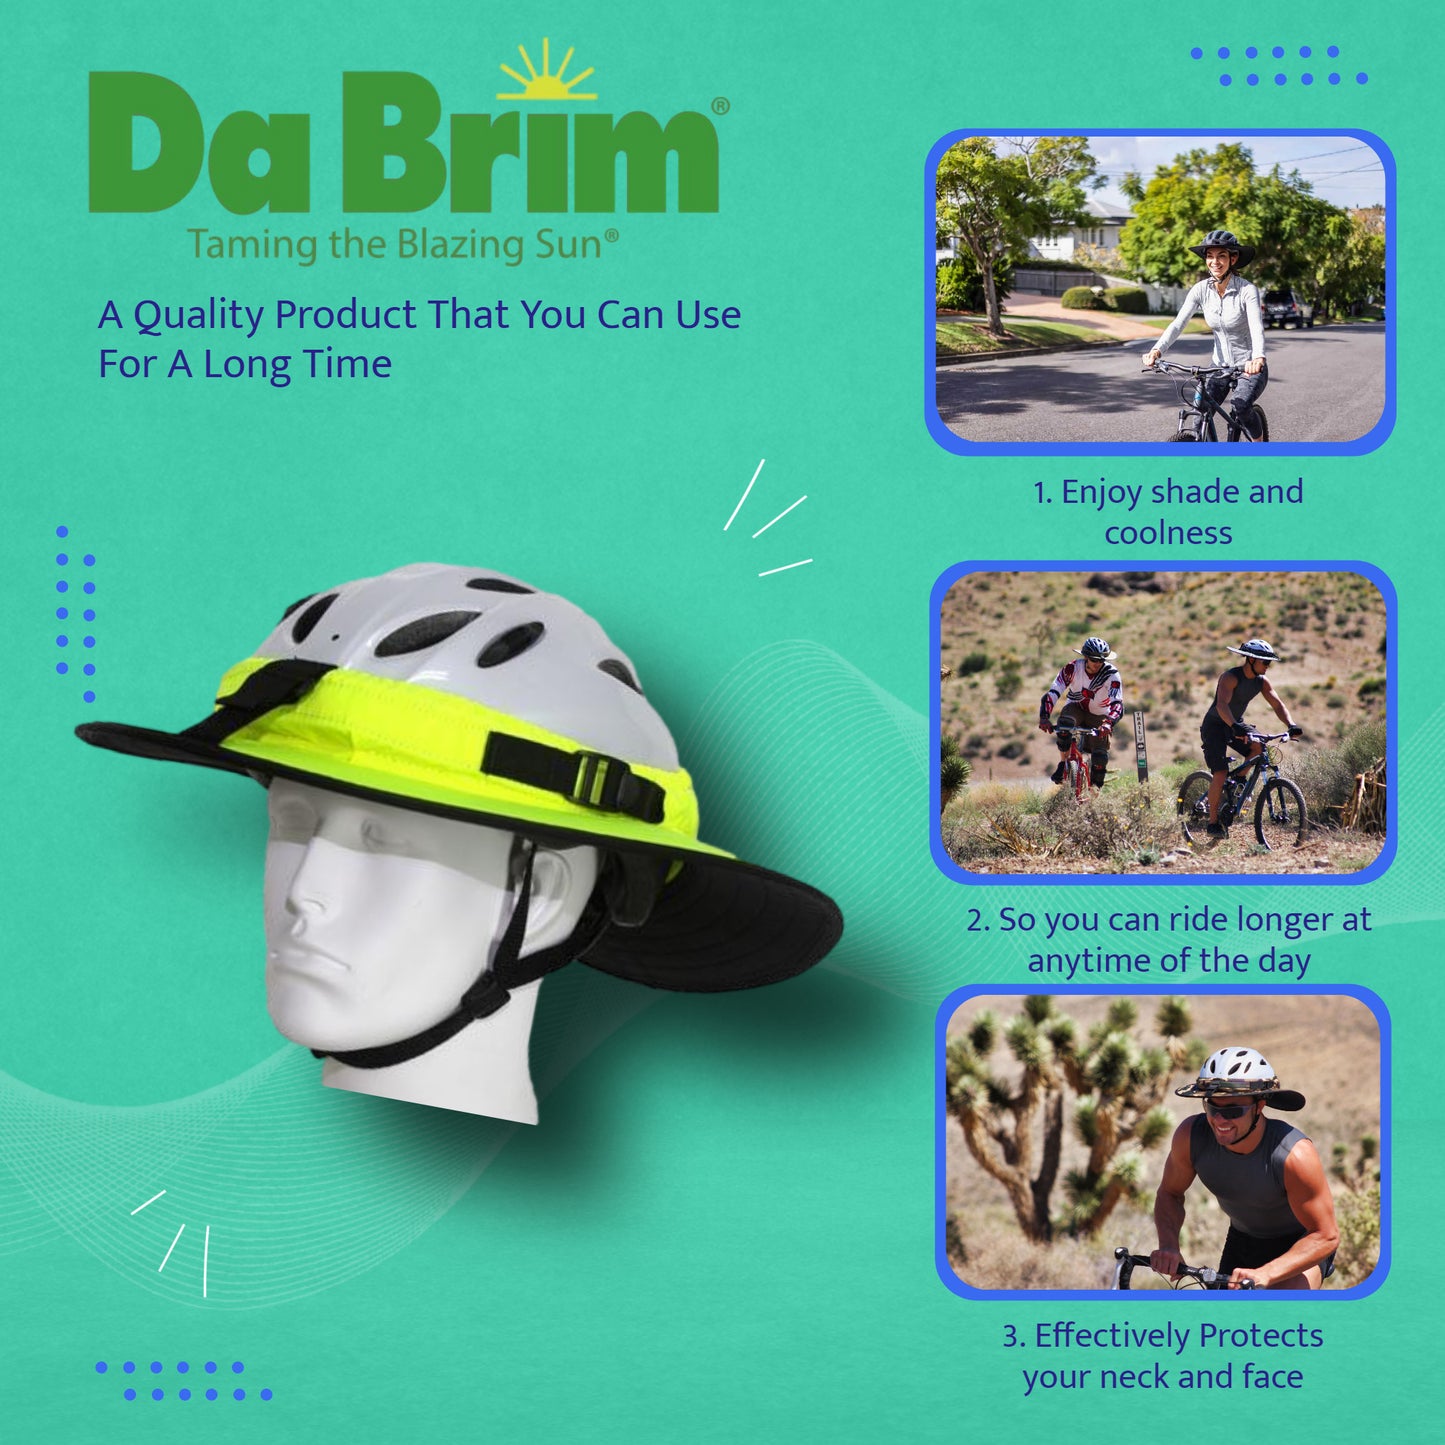 Enjoy shade and coolness of Da Brim Sporty Cycling so you can ride longer at anytime of the day.